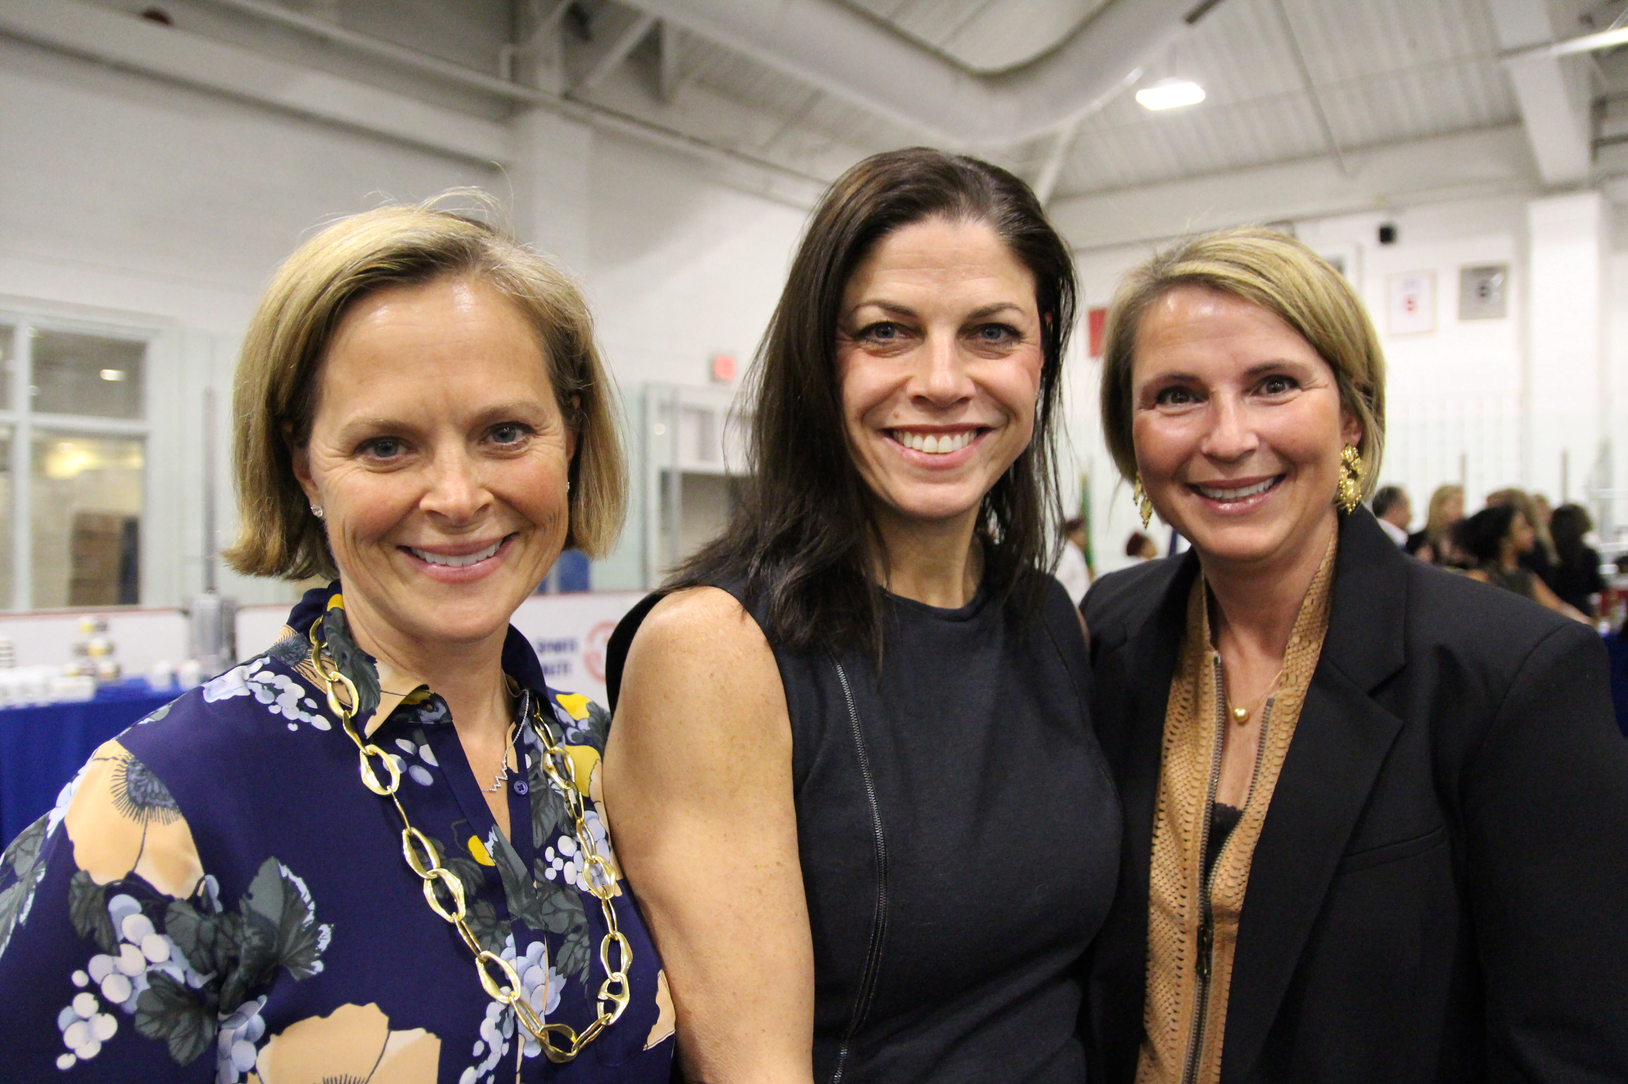 Kristen Rosenbaum, Alessandra Mineo-Long, and Michele Smith at the Youth of the Year event at the Boys & Girls Club. Feb 7, 2019 Photo: Leslie Yager